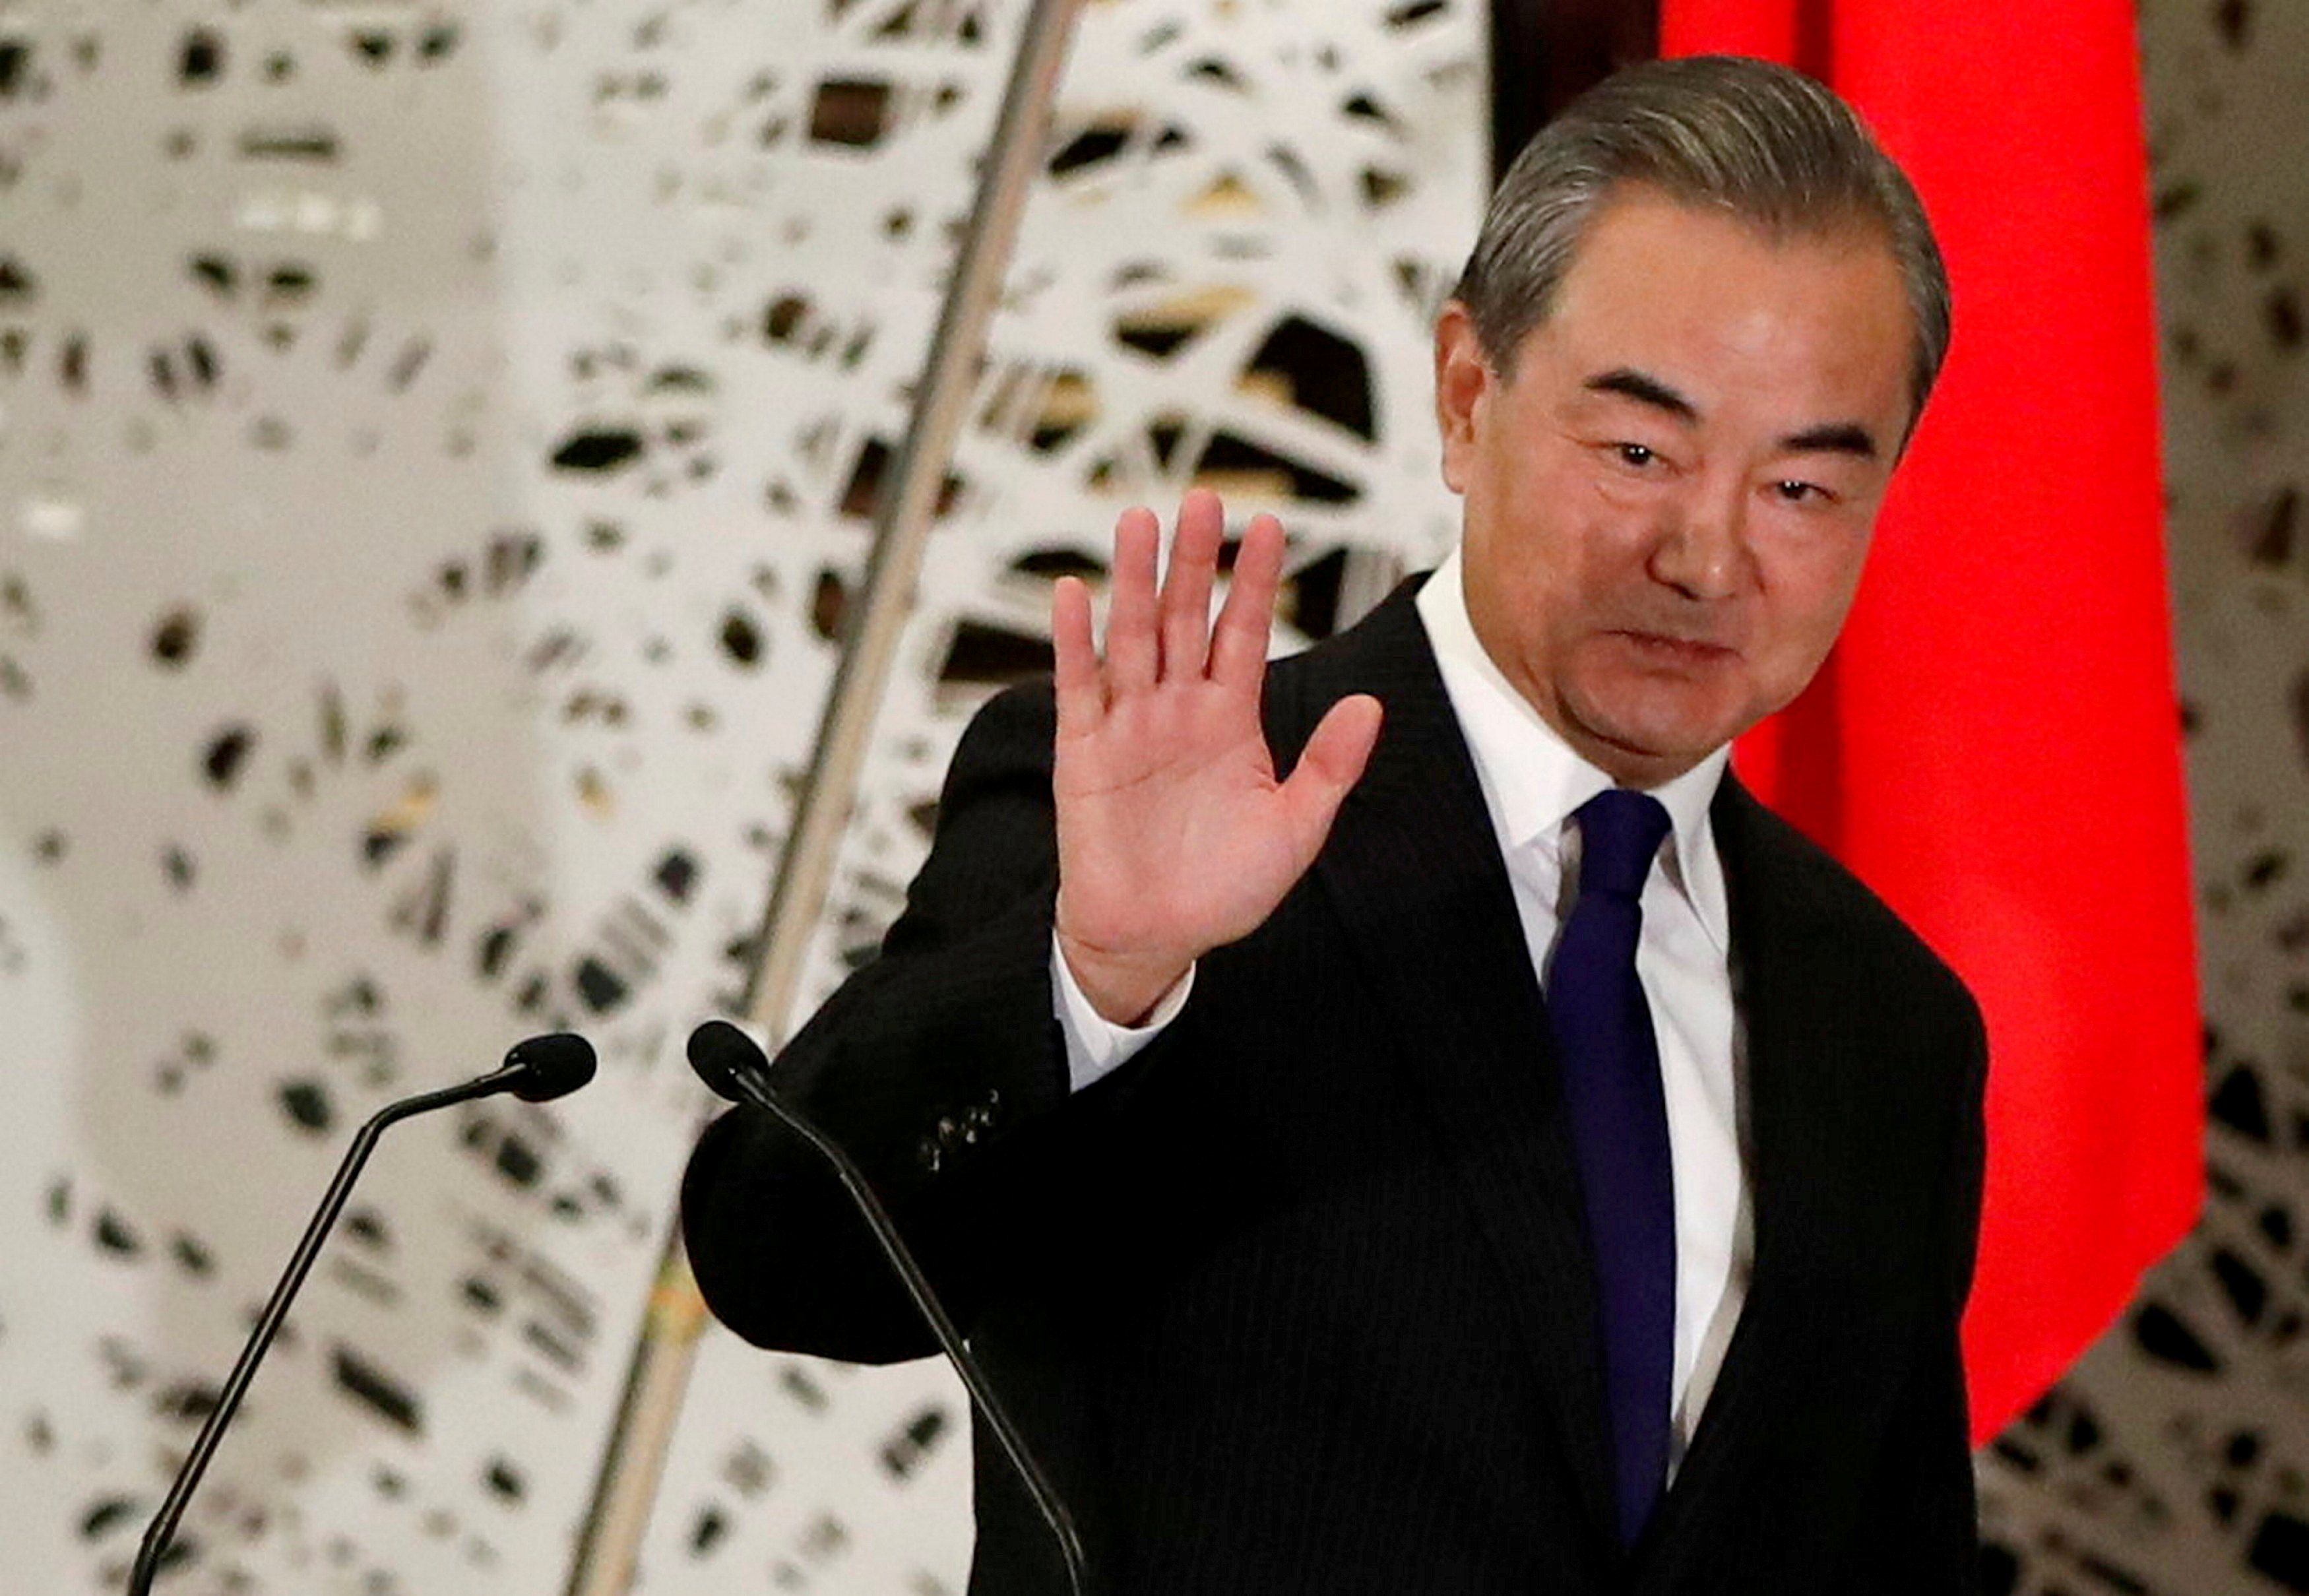 China's State Councillor and Foreign Minister Wang Yi waves as he leaves a news conference in Tokyo, Japan, November 24, 2020. REUTERS/Issei Kato/Pool/File Photo